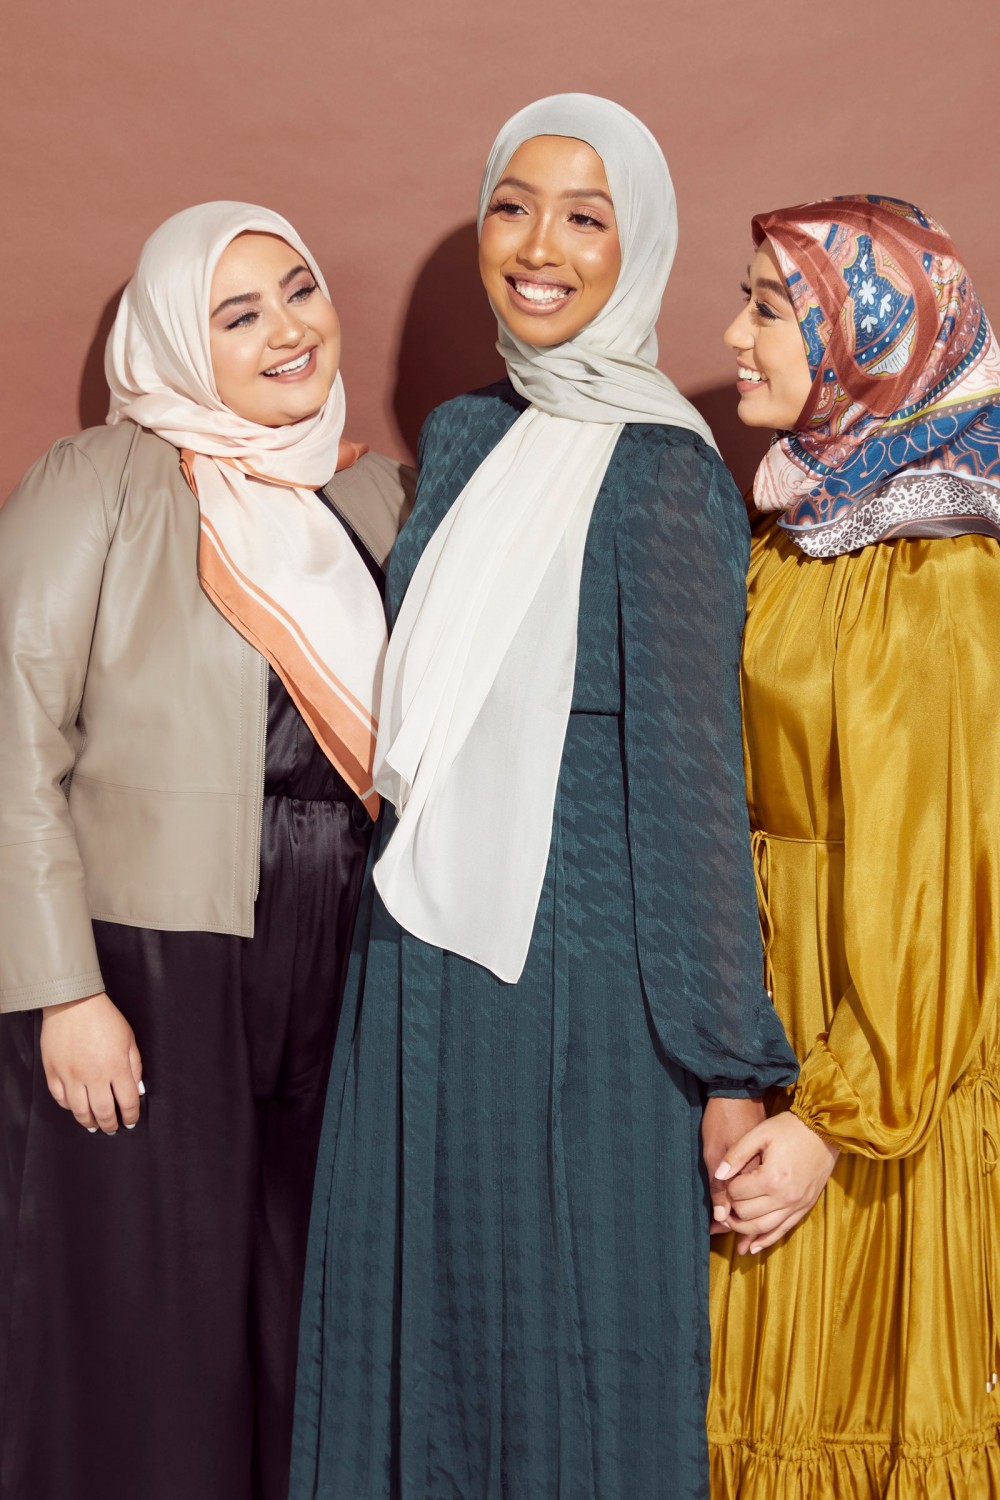 Henna  Hijabsa New EcoFriendly Hijab LineHopes to Make Shopping Modestly Easier